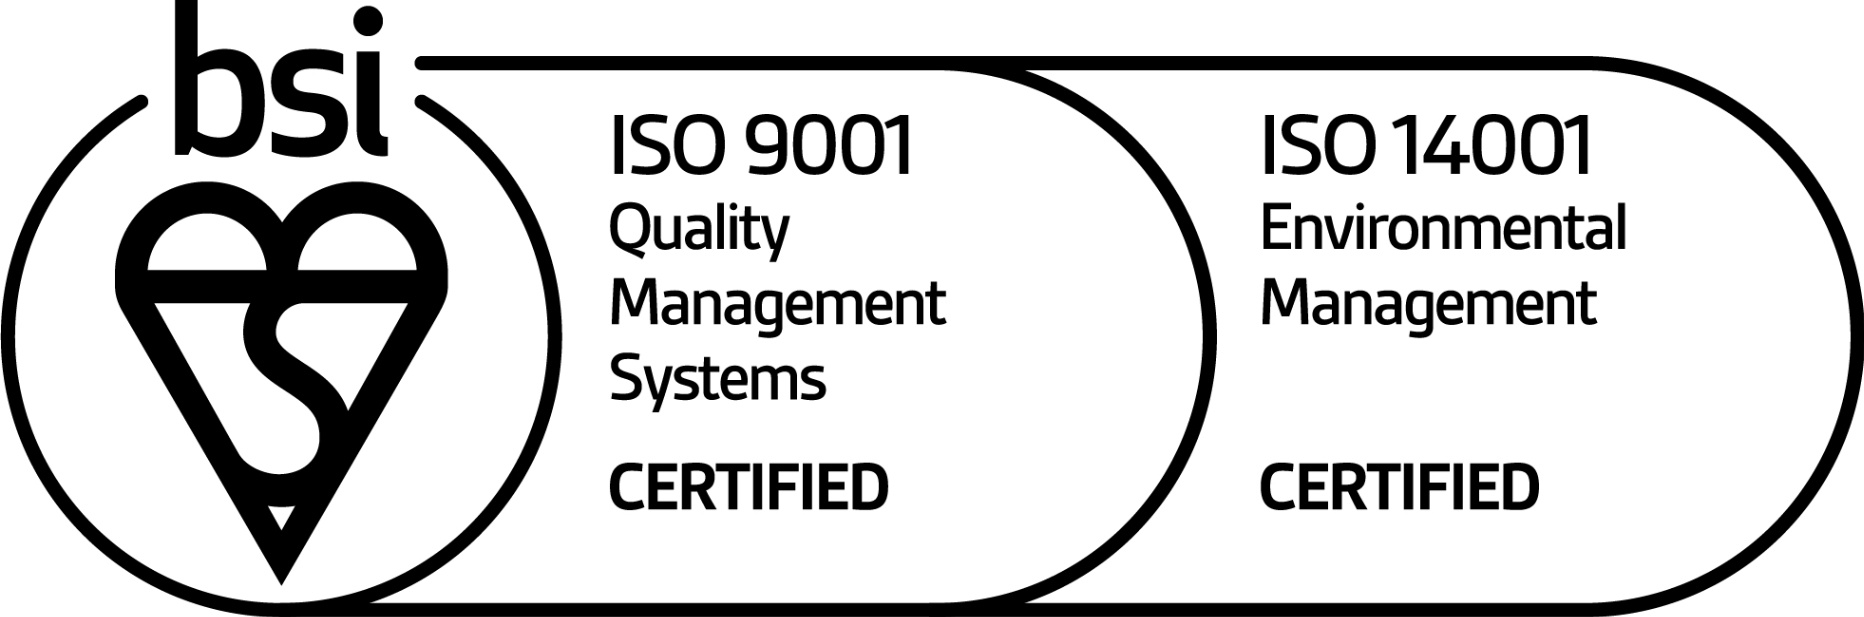 ISO 90001:2015 Quality Management